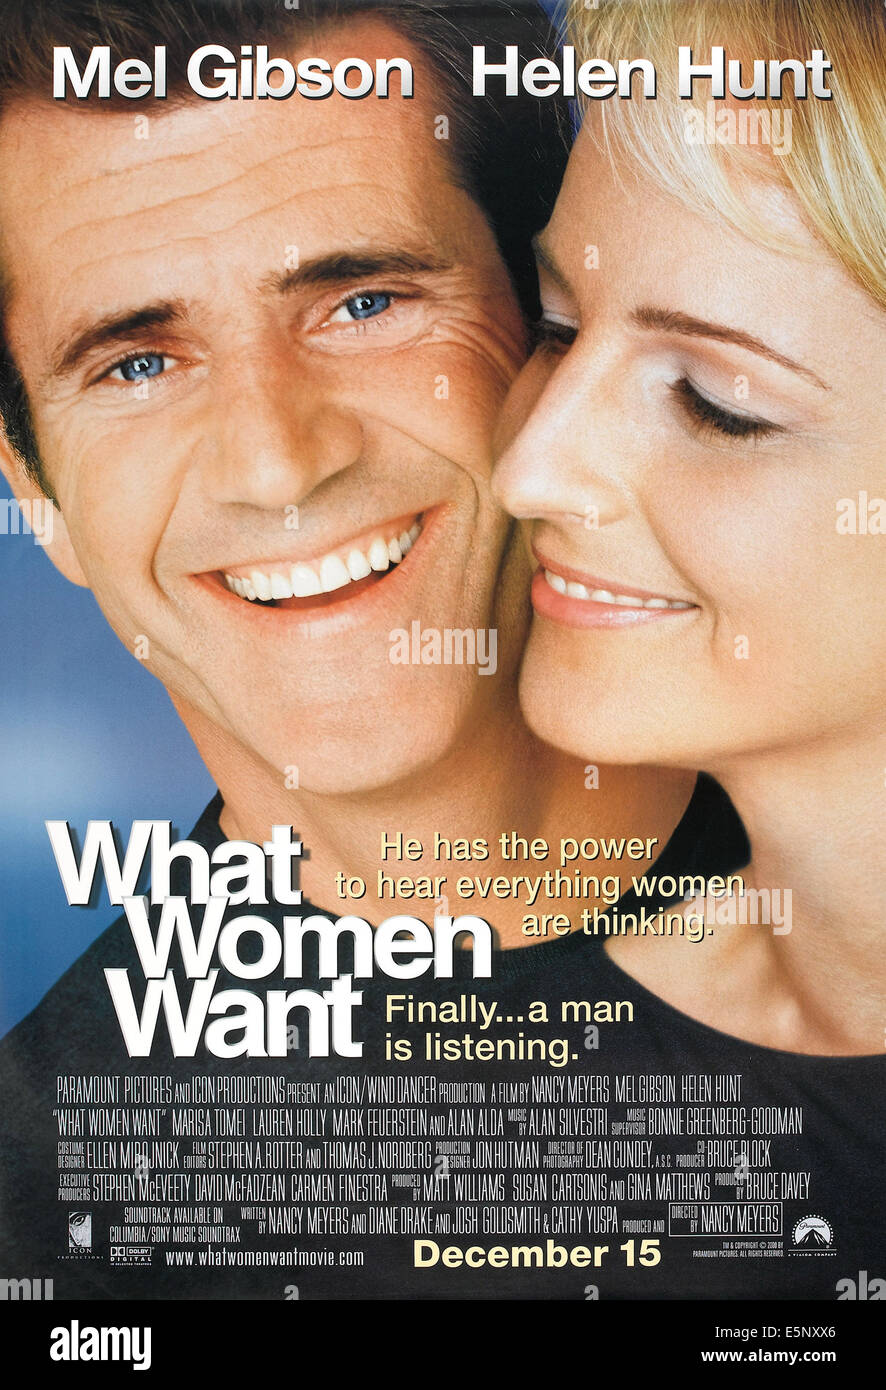 WHAT WOMEN WANT, US advance poster, from left: Mel Gibson, Helen Hunt, 2000, © Paramount/courtesy Everett Collection Stock Photo